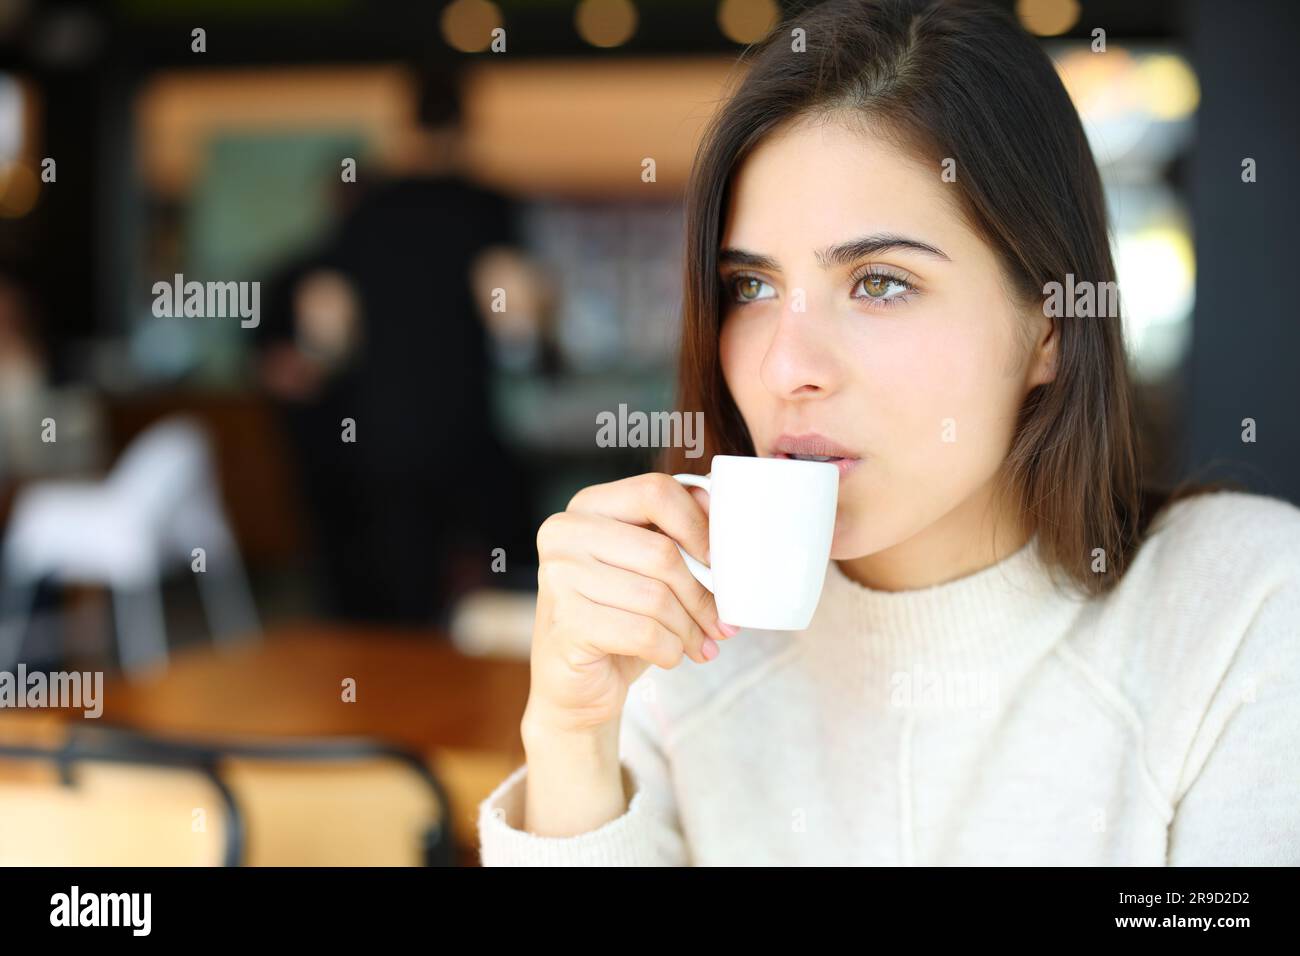 Serious woman drinking coffee alone in a bar looking away Stock Photo